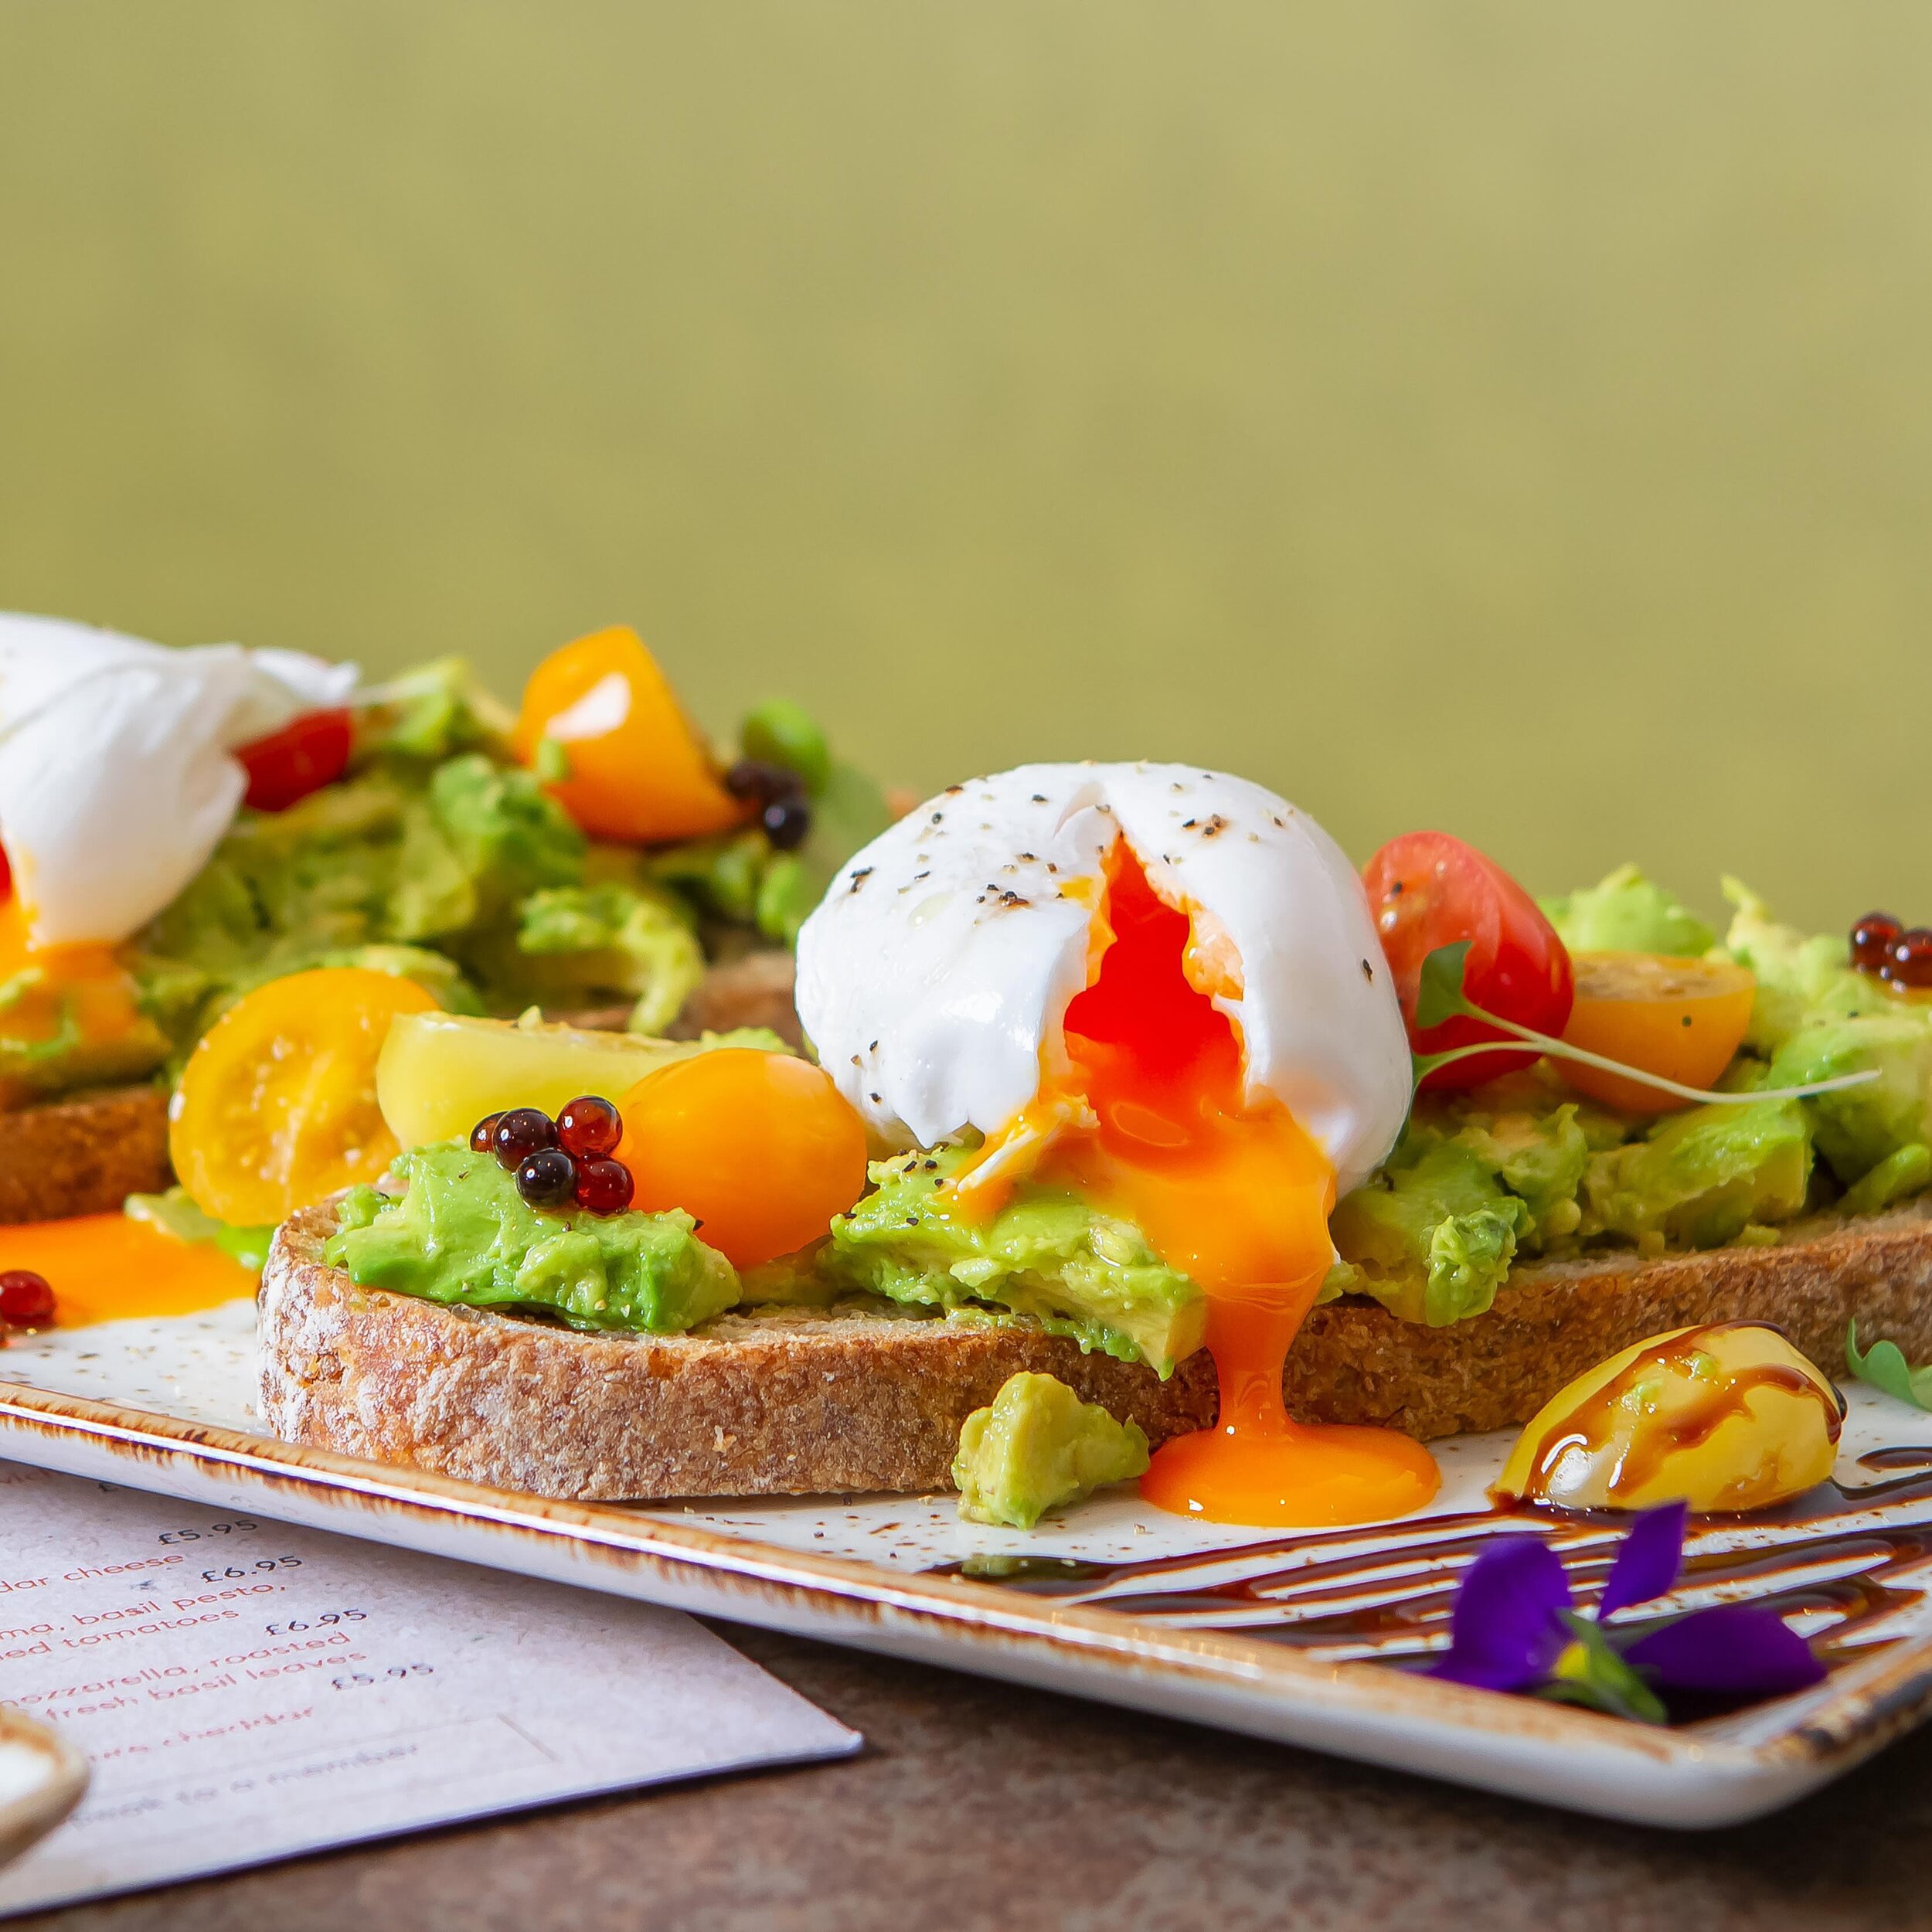 The Avocado special is always a big hit whatever time of day! 

We offer a large selection of all day breakfast choices  on our menu using only the best ingredients available.